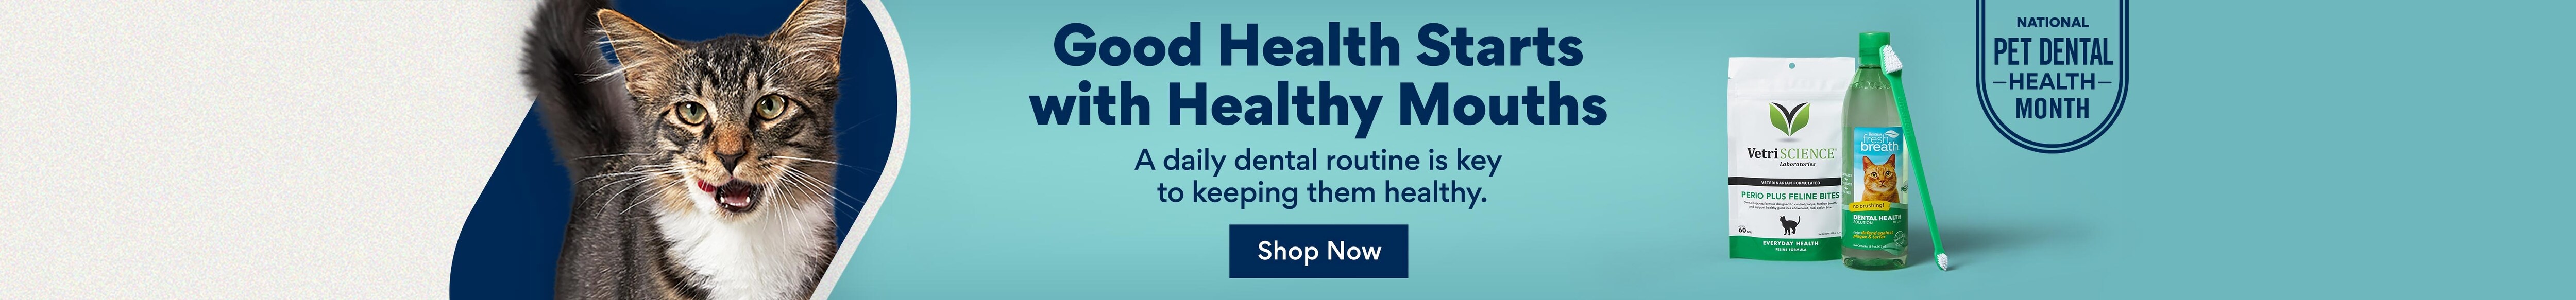 Good health starts wit healthy mouths a daily dental routine is key to keeping them healthy. Shop now.